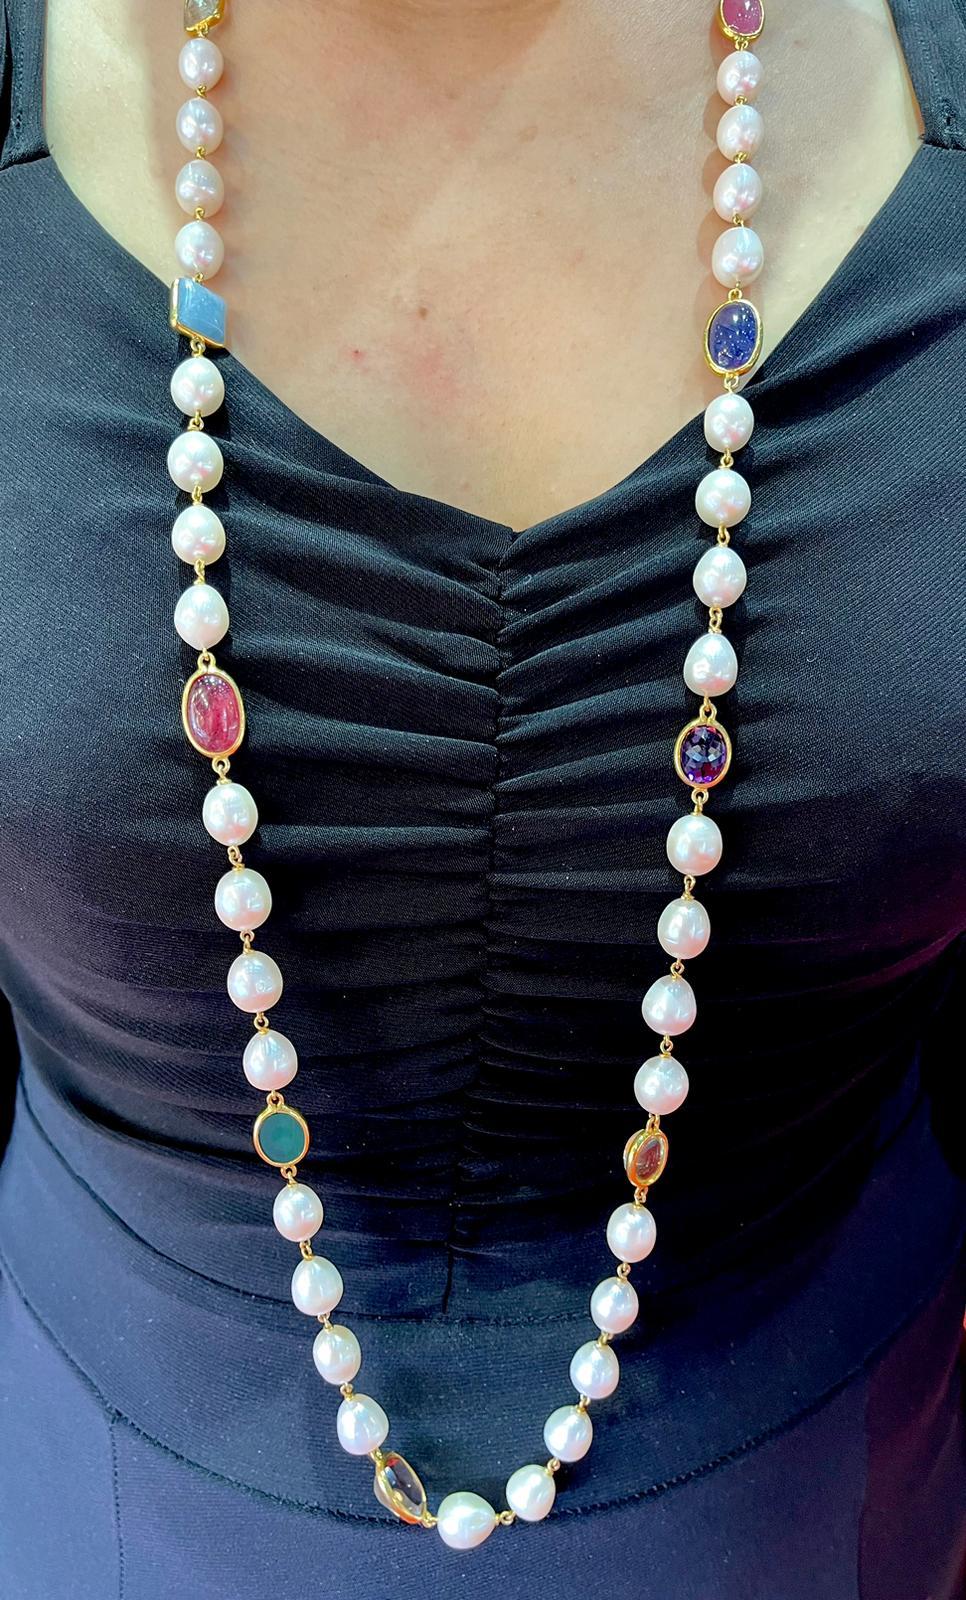 Oval Cut Bochic “Capri” Necklace, Gems & South Sea Pearls Set in 22 Gold & Silver For Sale